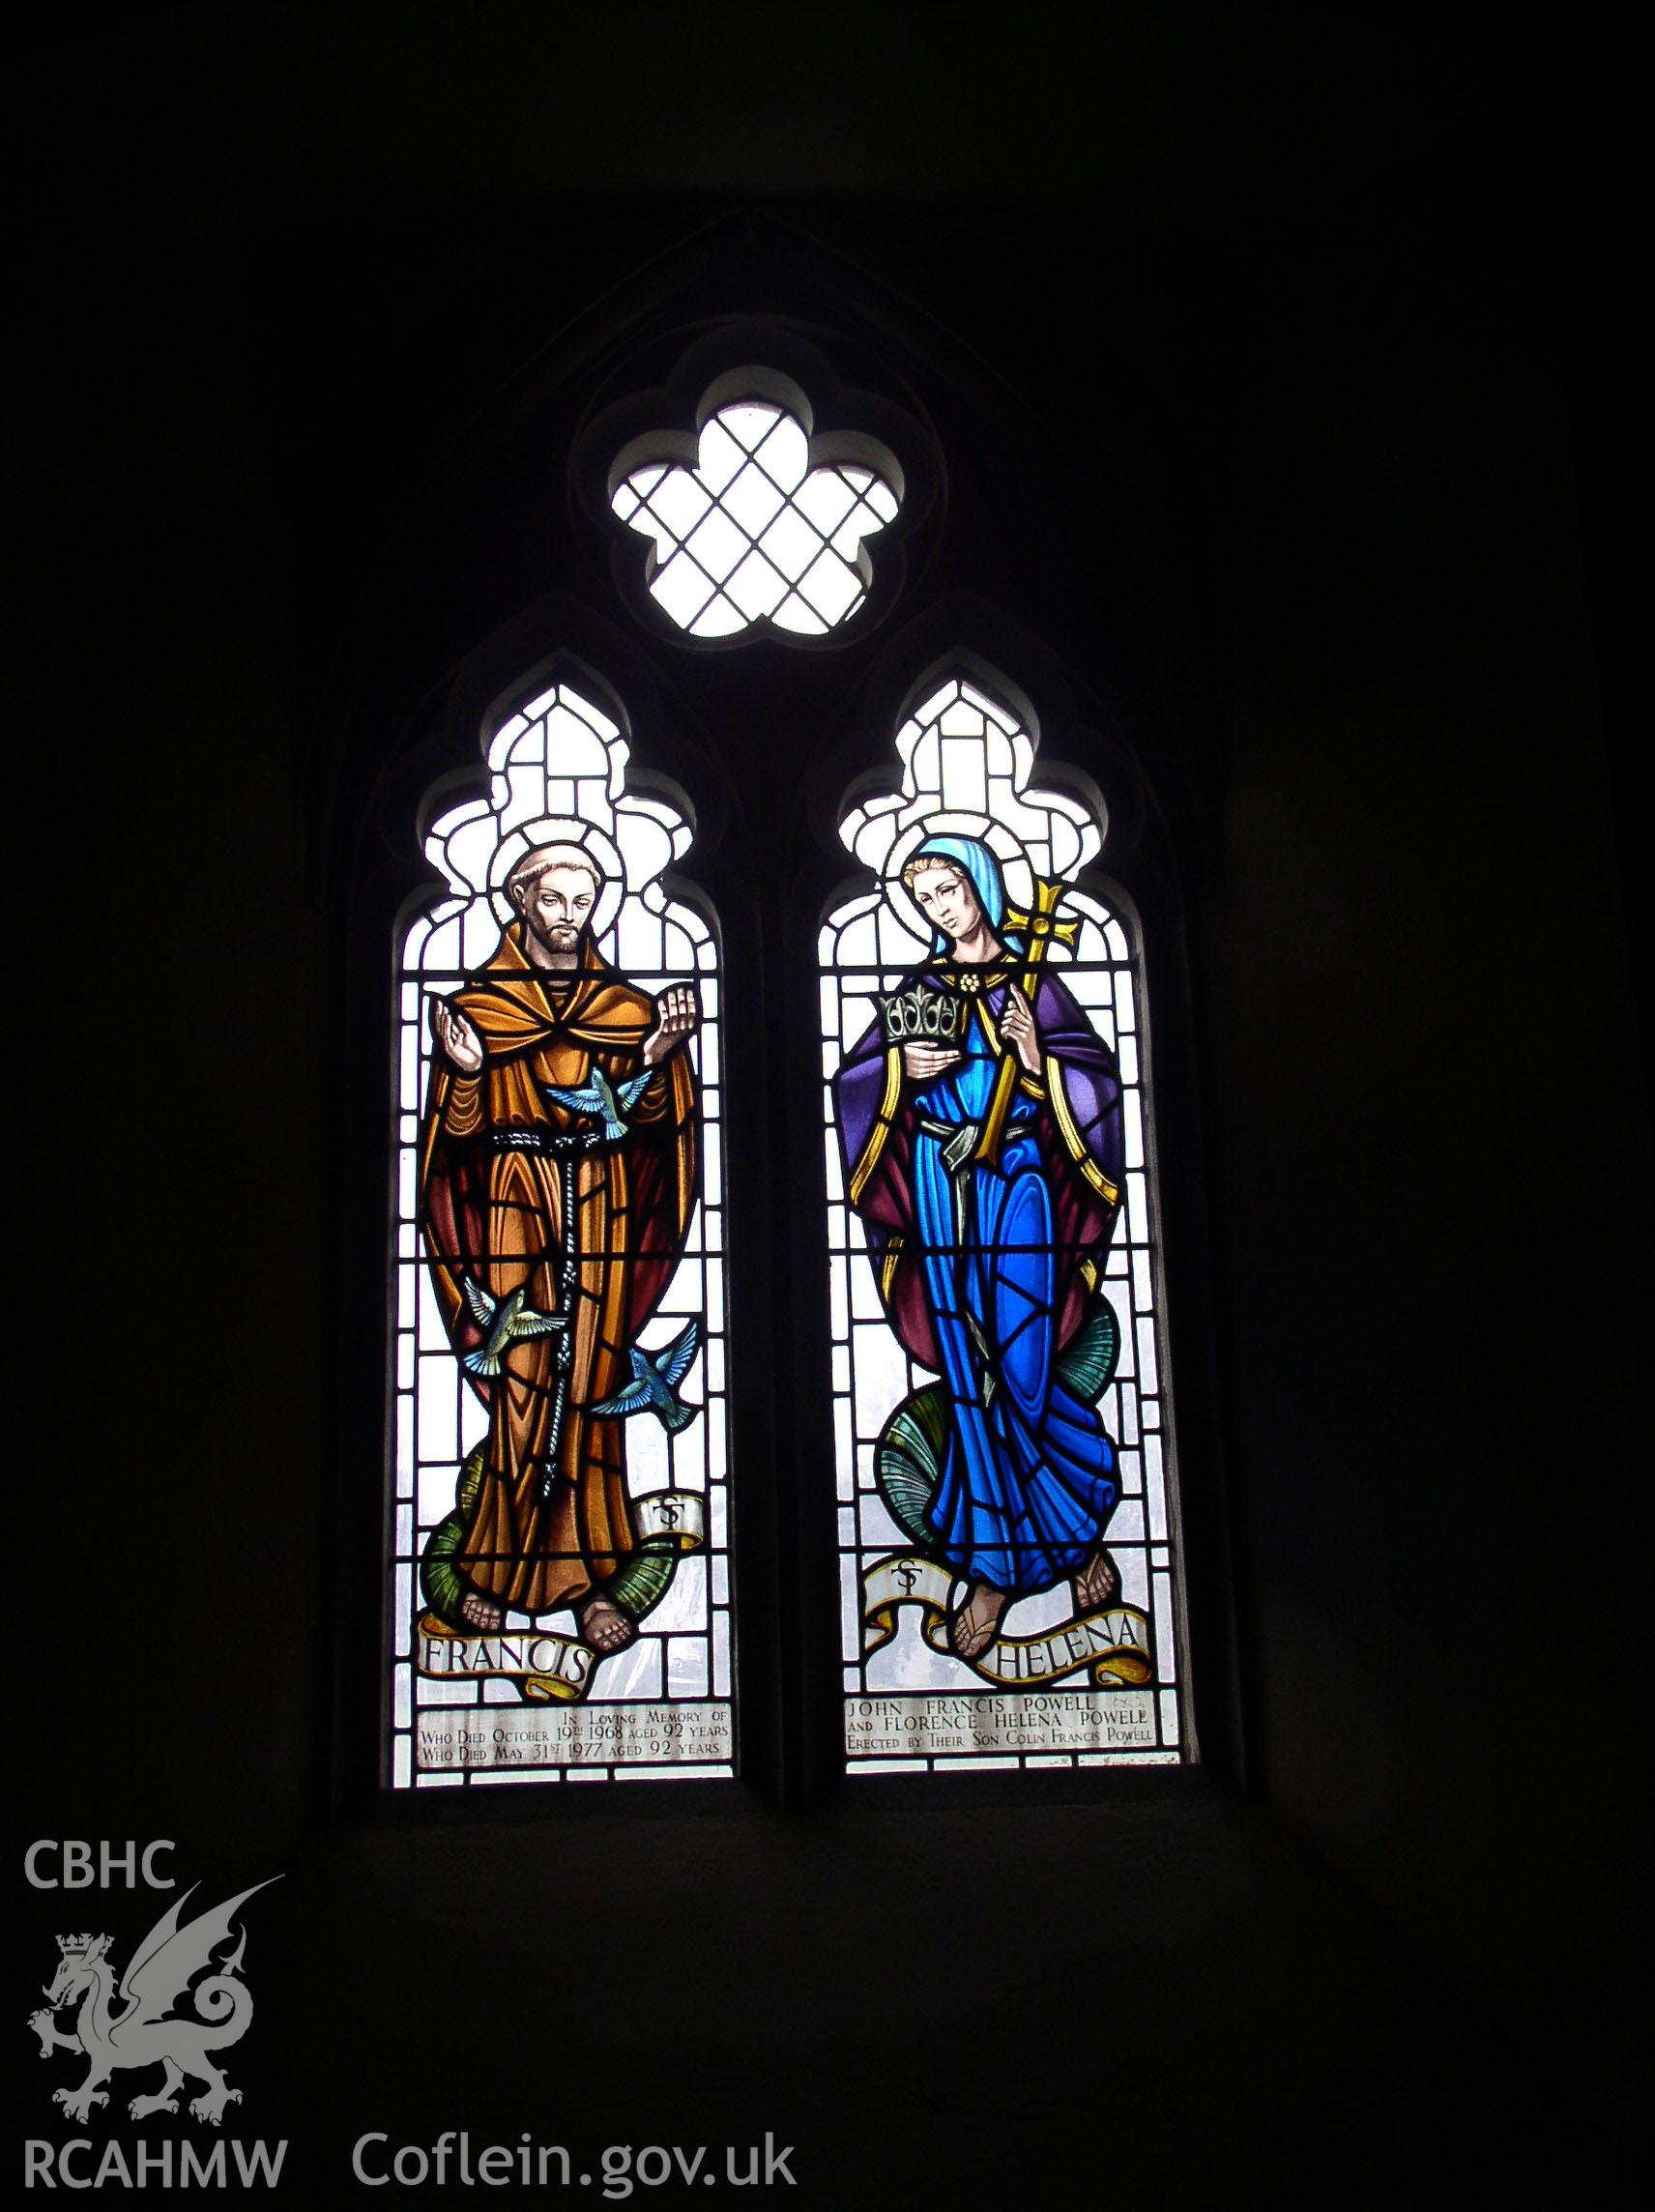 Colour digital photograph showing an interior view of a stained glass window at St Bride's Church, St Brides Major; Glamorgan.